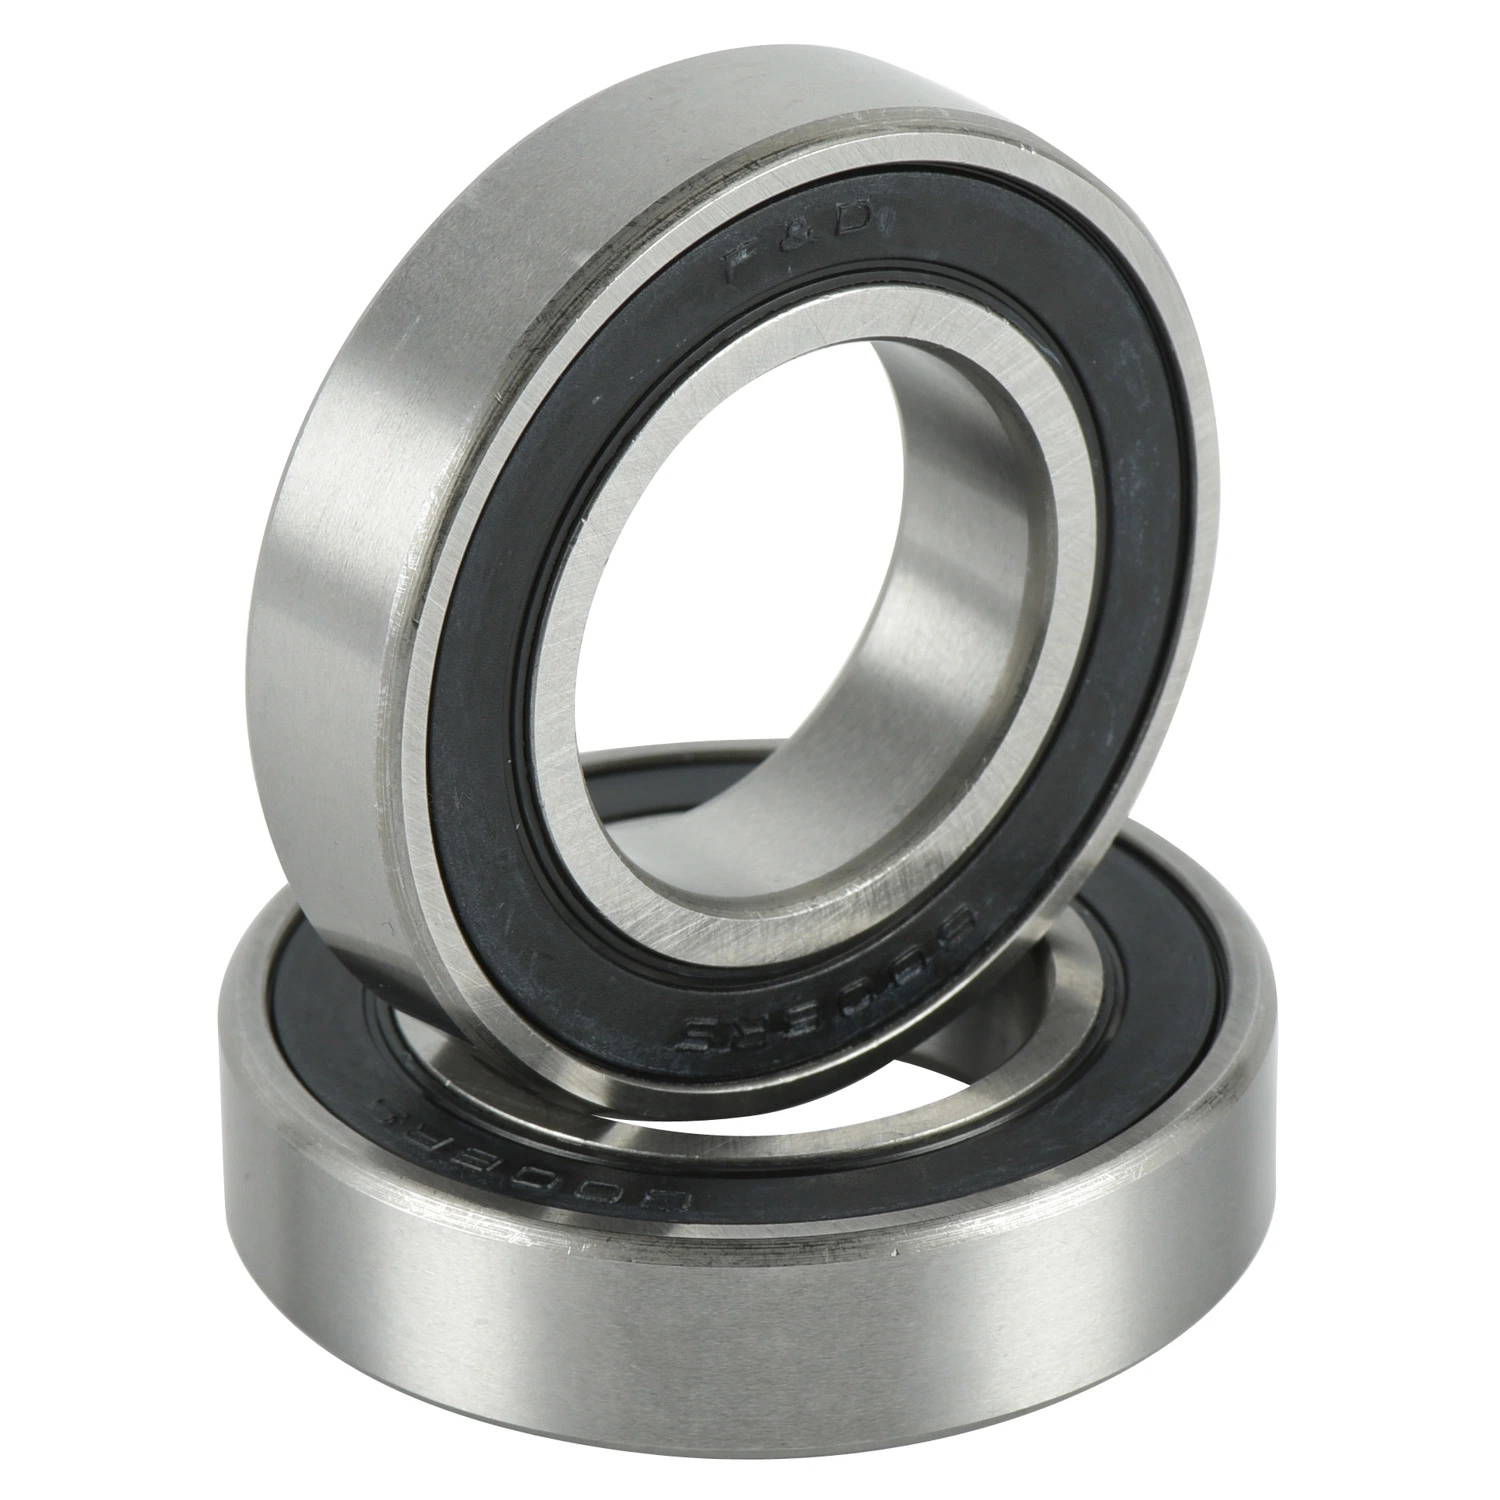 Roller bearing 6202zz for Vehicle/Auto/Motorcycle/Scooter/Bicycle Parts/Accessories